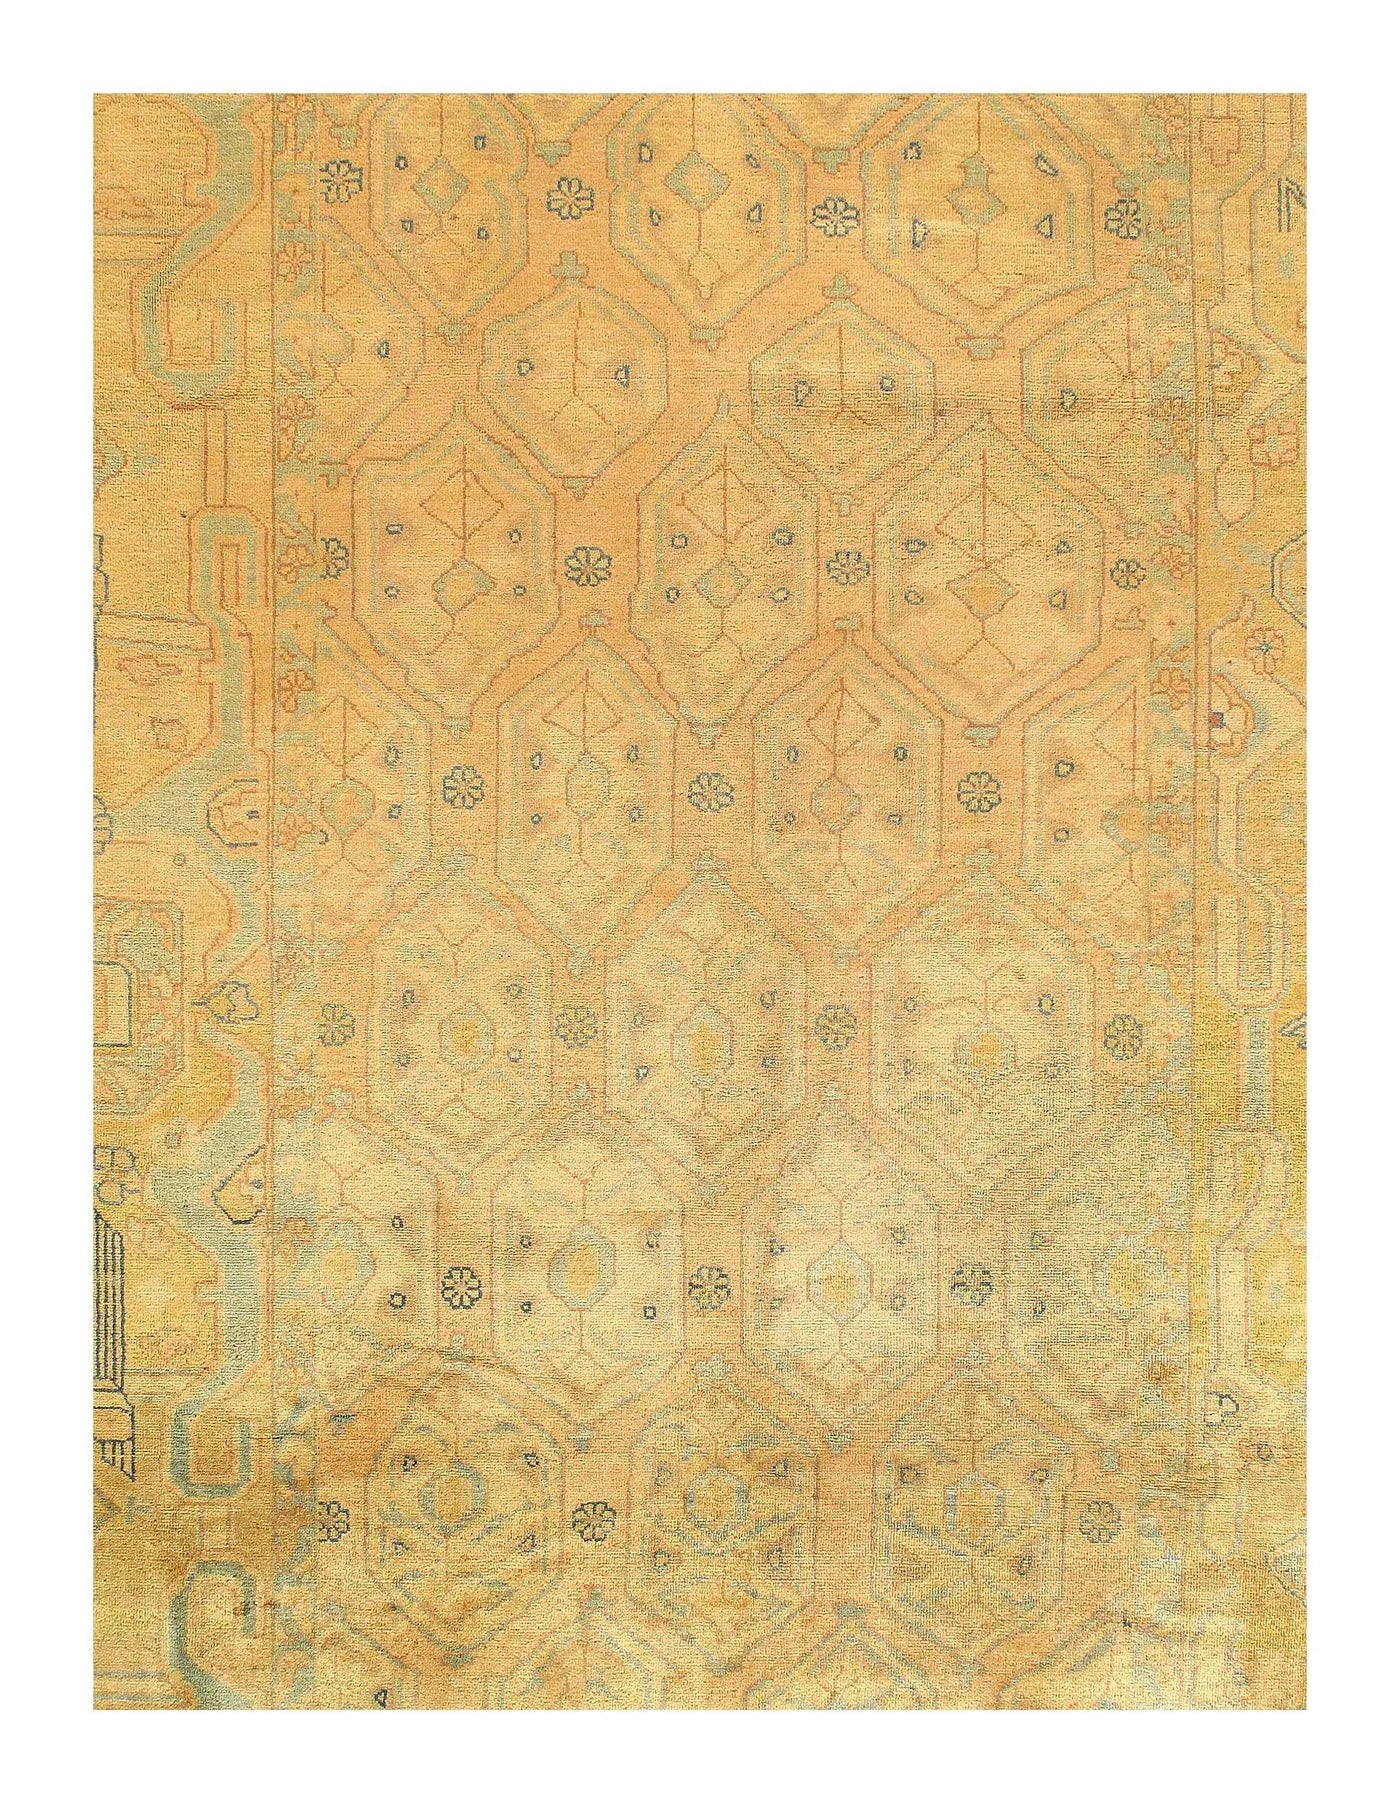 Fine Arts Craft Hand-Knotted Rug - 9'8" X 13'11"